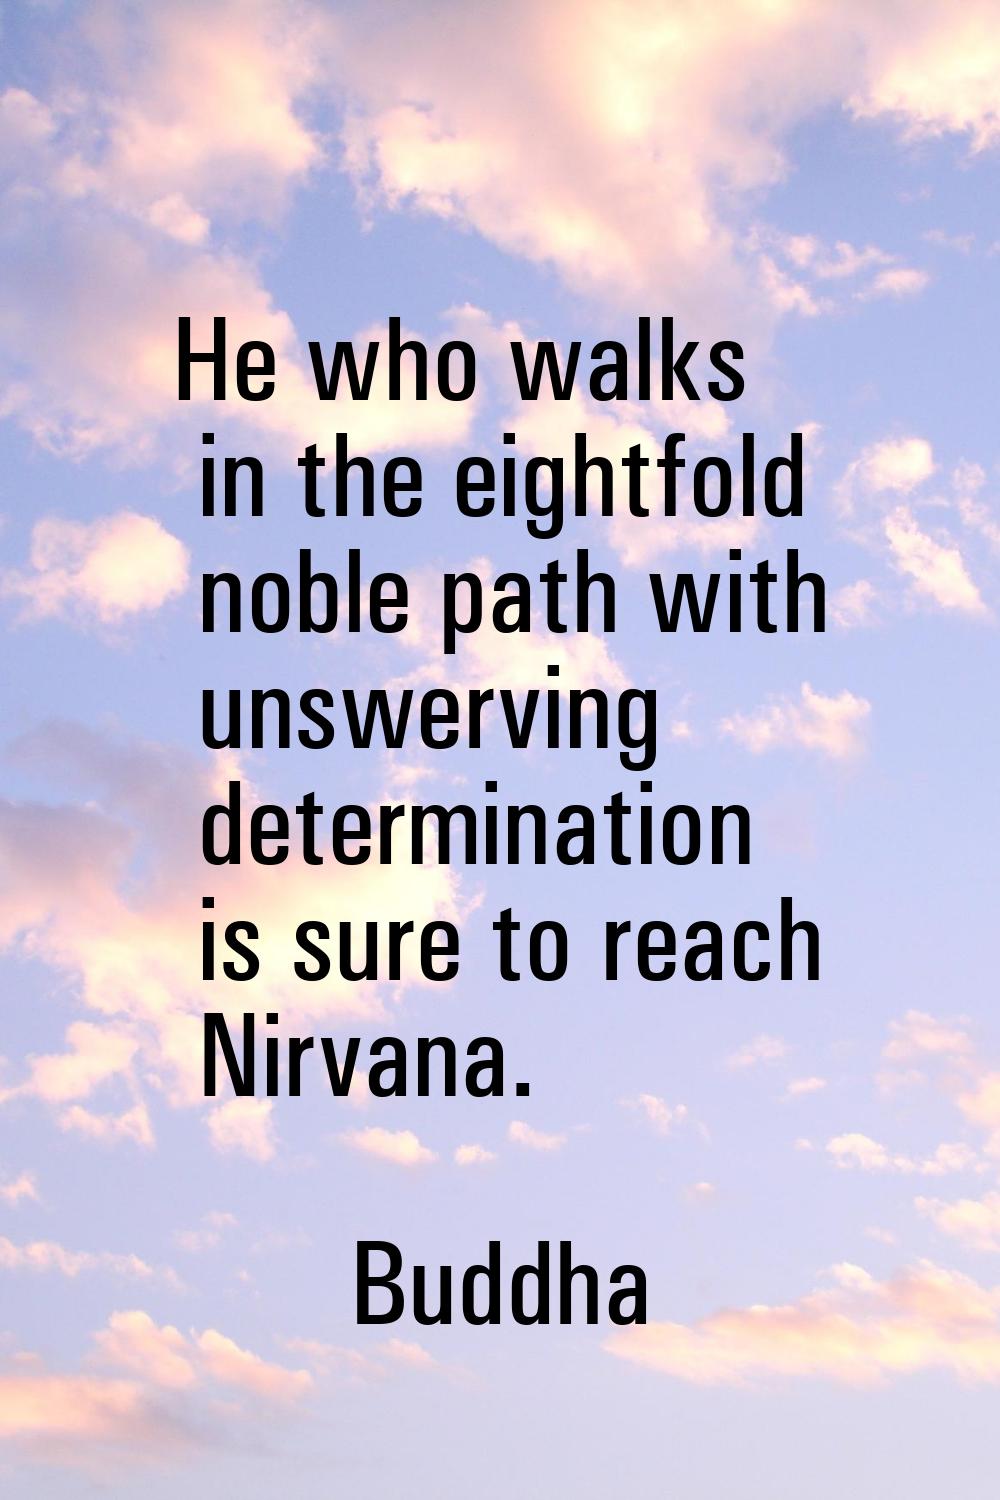 He who walks in the eightfold noble path with unswerving determination is sure to reach Nirvana.